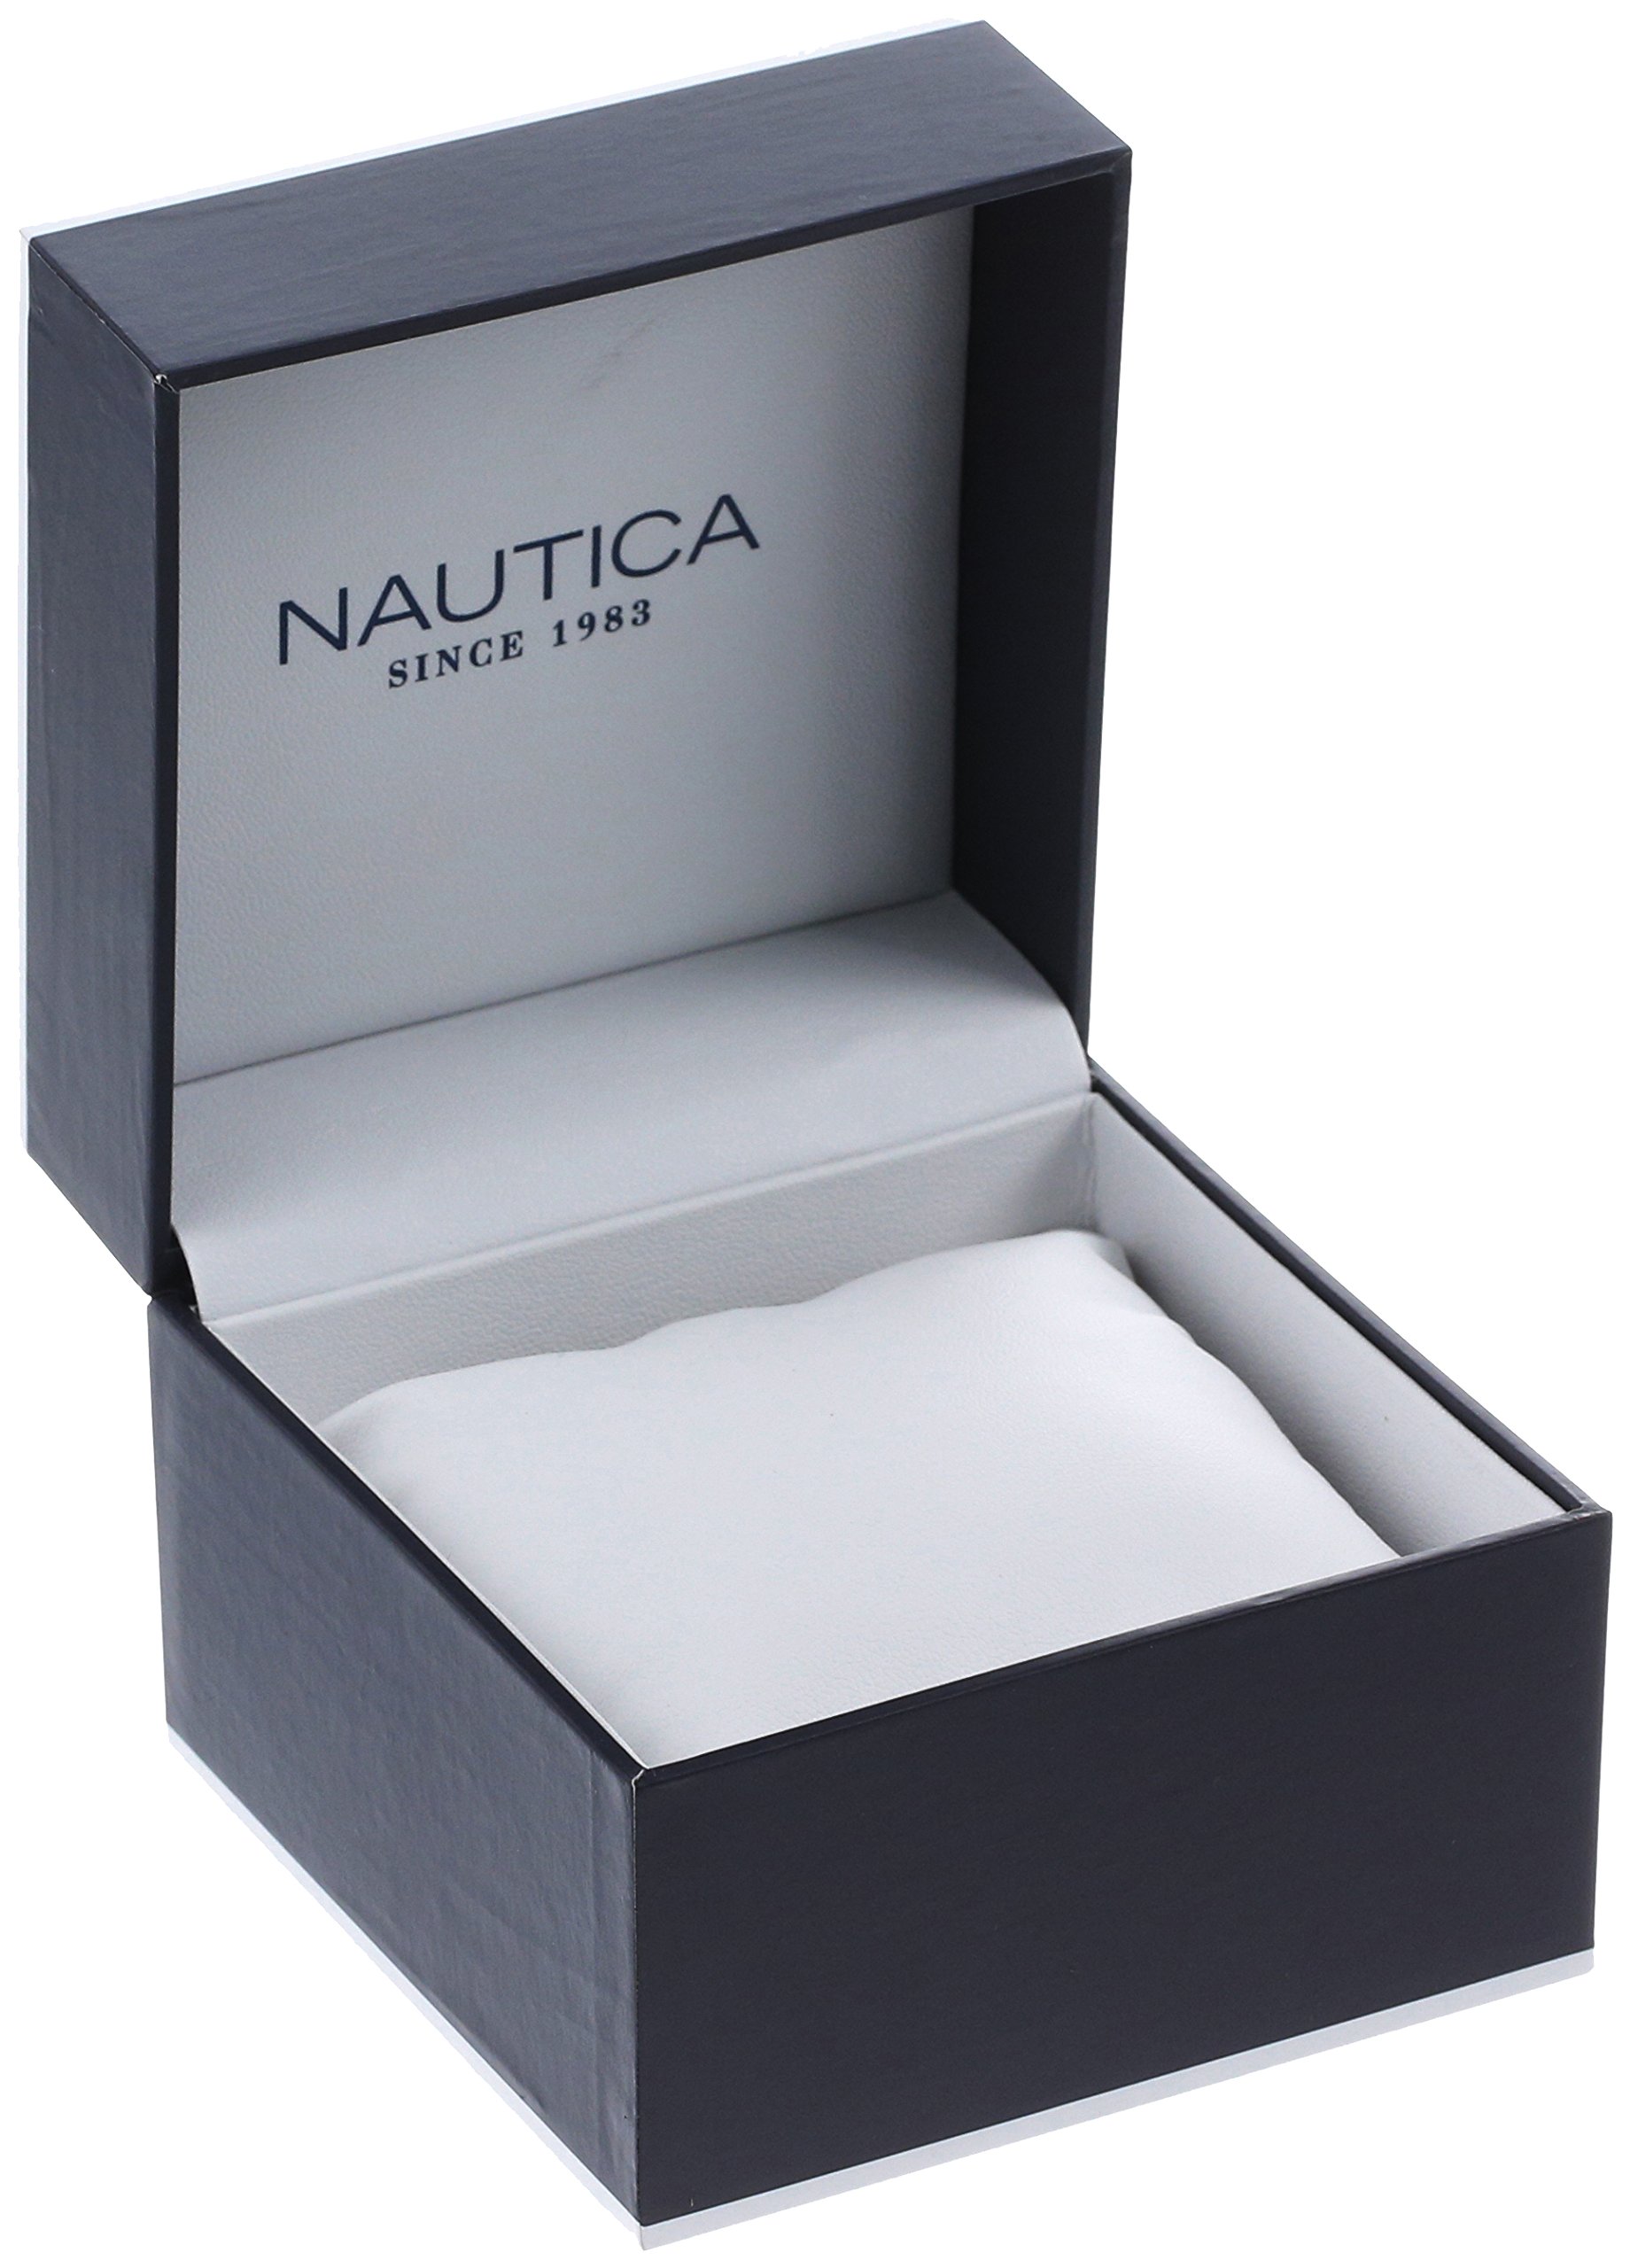 Nautica Men's N16553G Stainless Steel Watch with Black Band